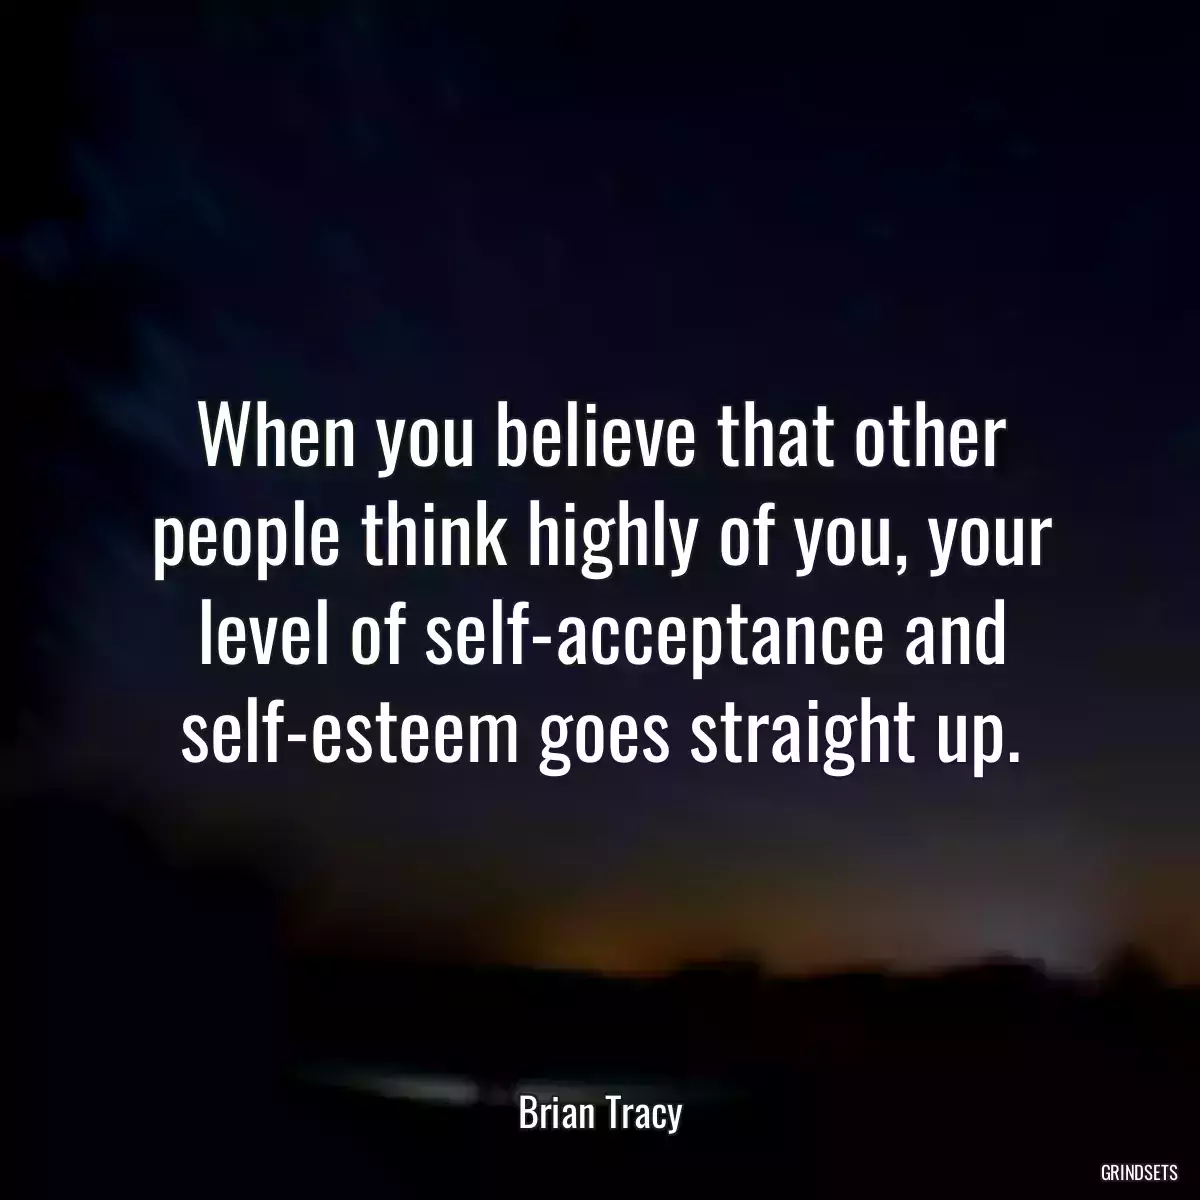 When you believe that other people think highly of you, your level of self-acceptance and self-esteem goes straight up.